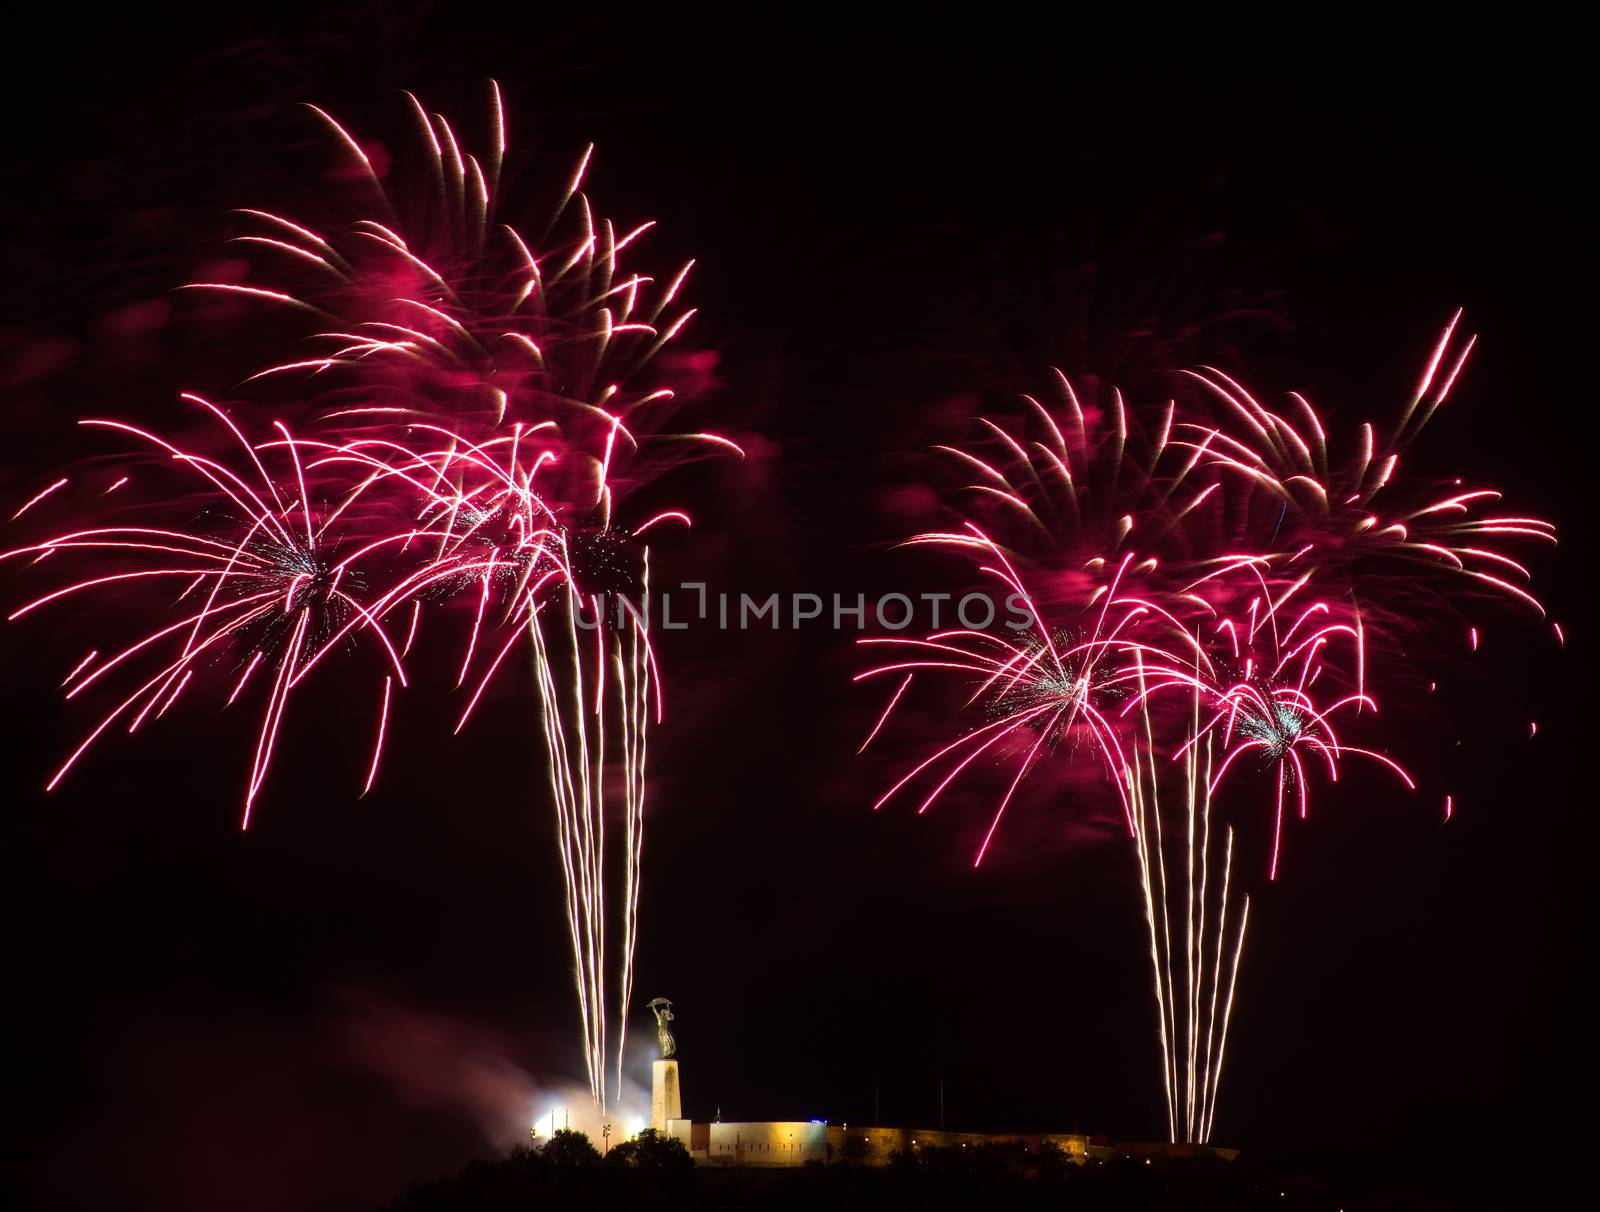 Fireworks over Liberty statue in Budapest, Hungary by anderm